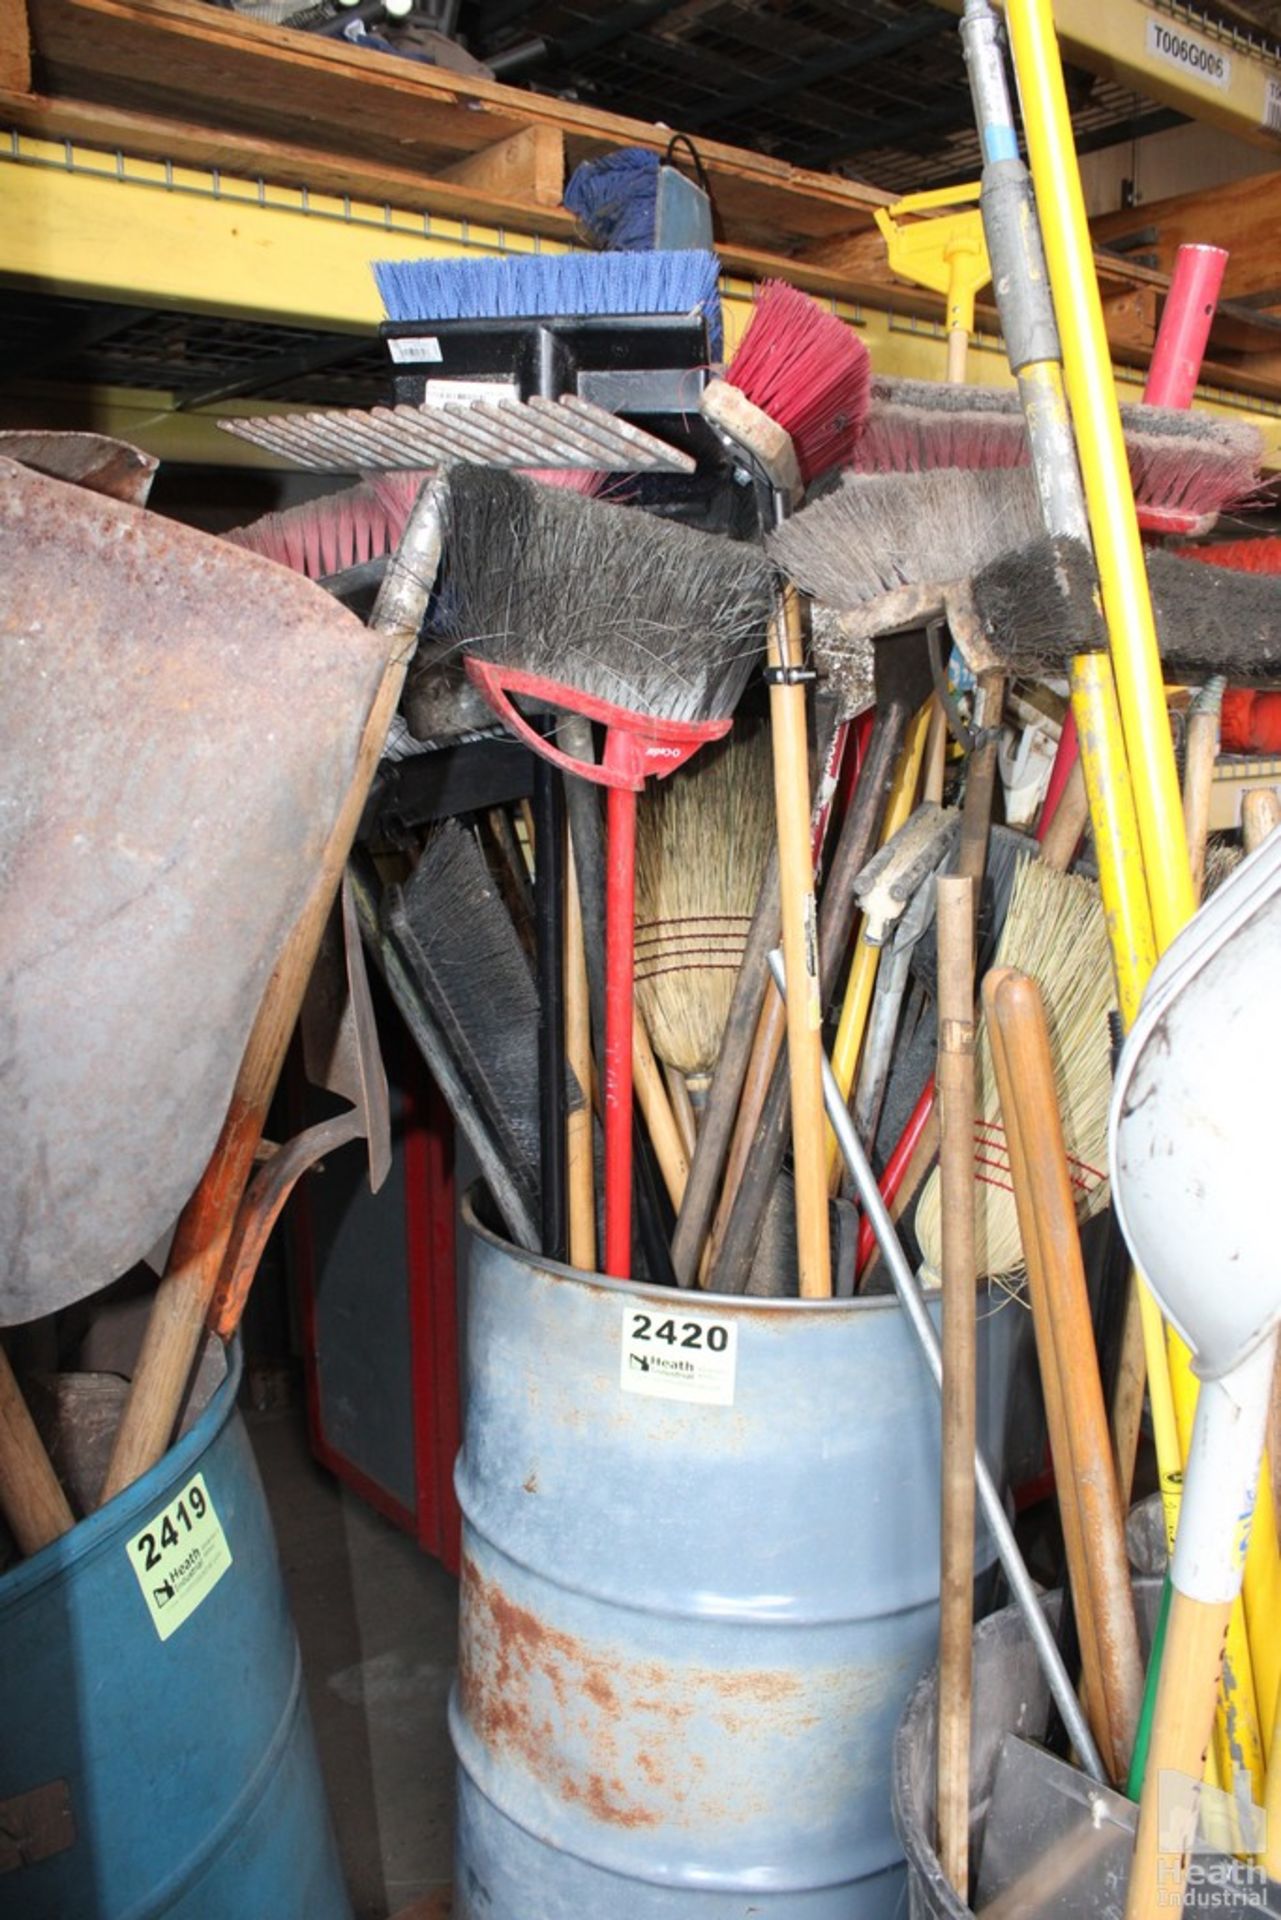 BARREL OF BROOMS, SQUEEGEES AND HANDLES